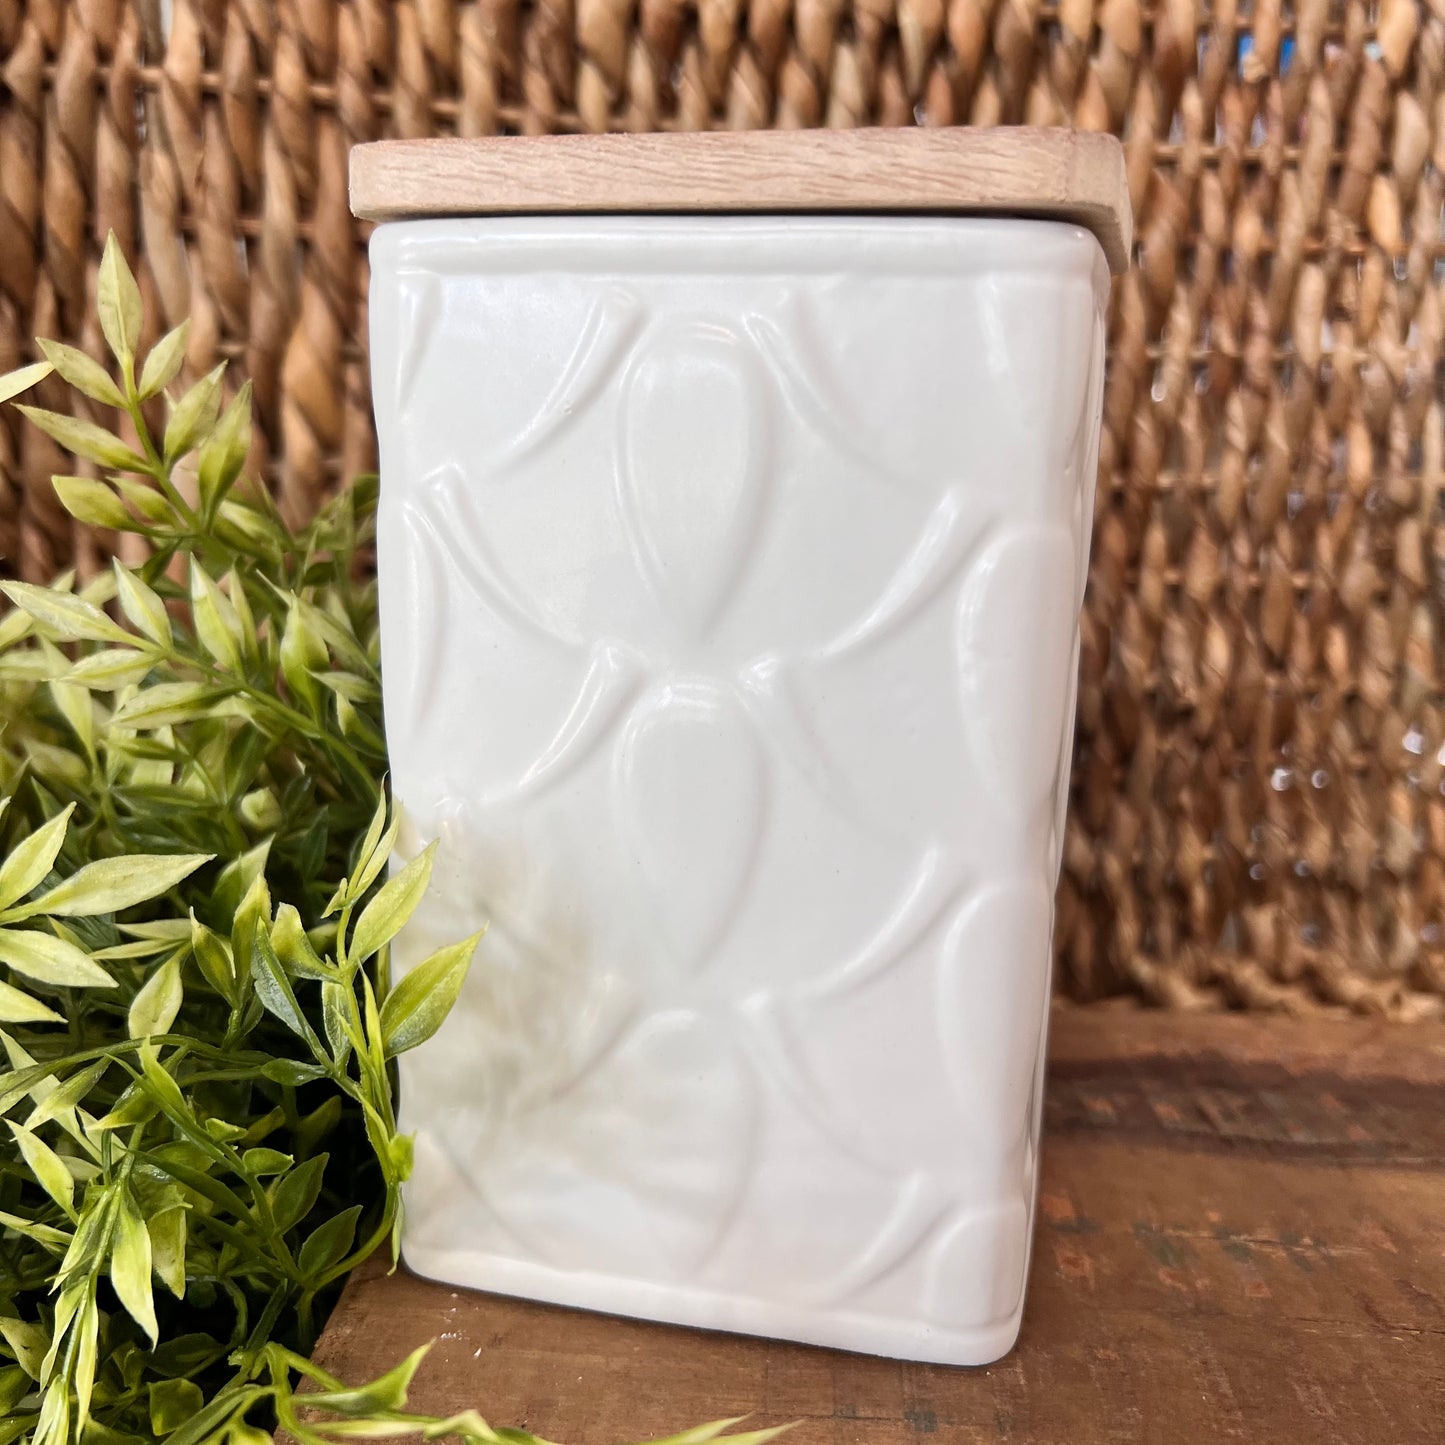 tall square candle in white ceramic canister with geometric pattern and a wooden lid set on wood table with greenery.